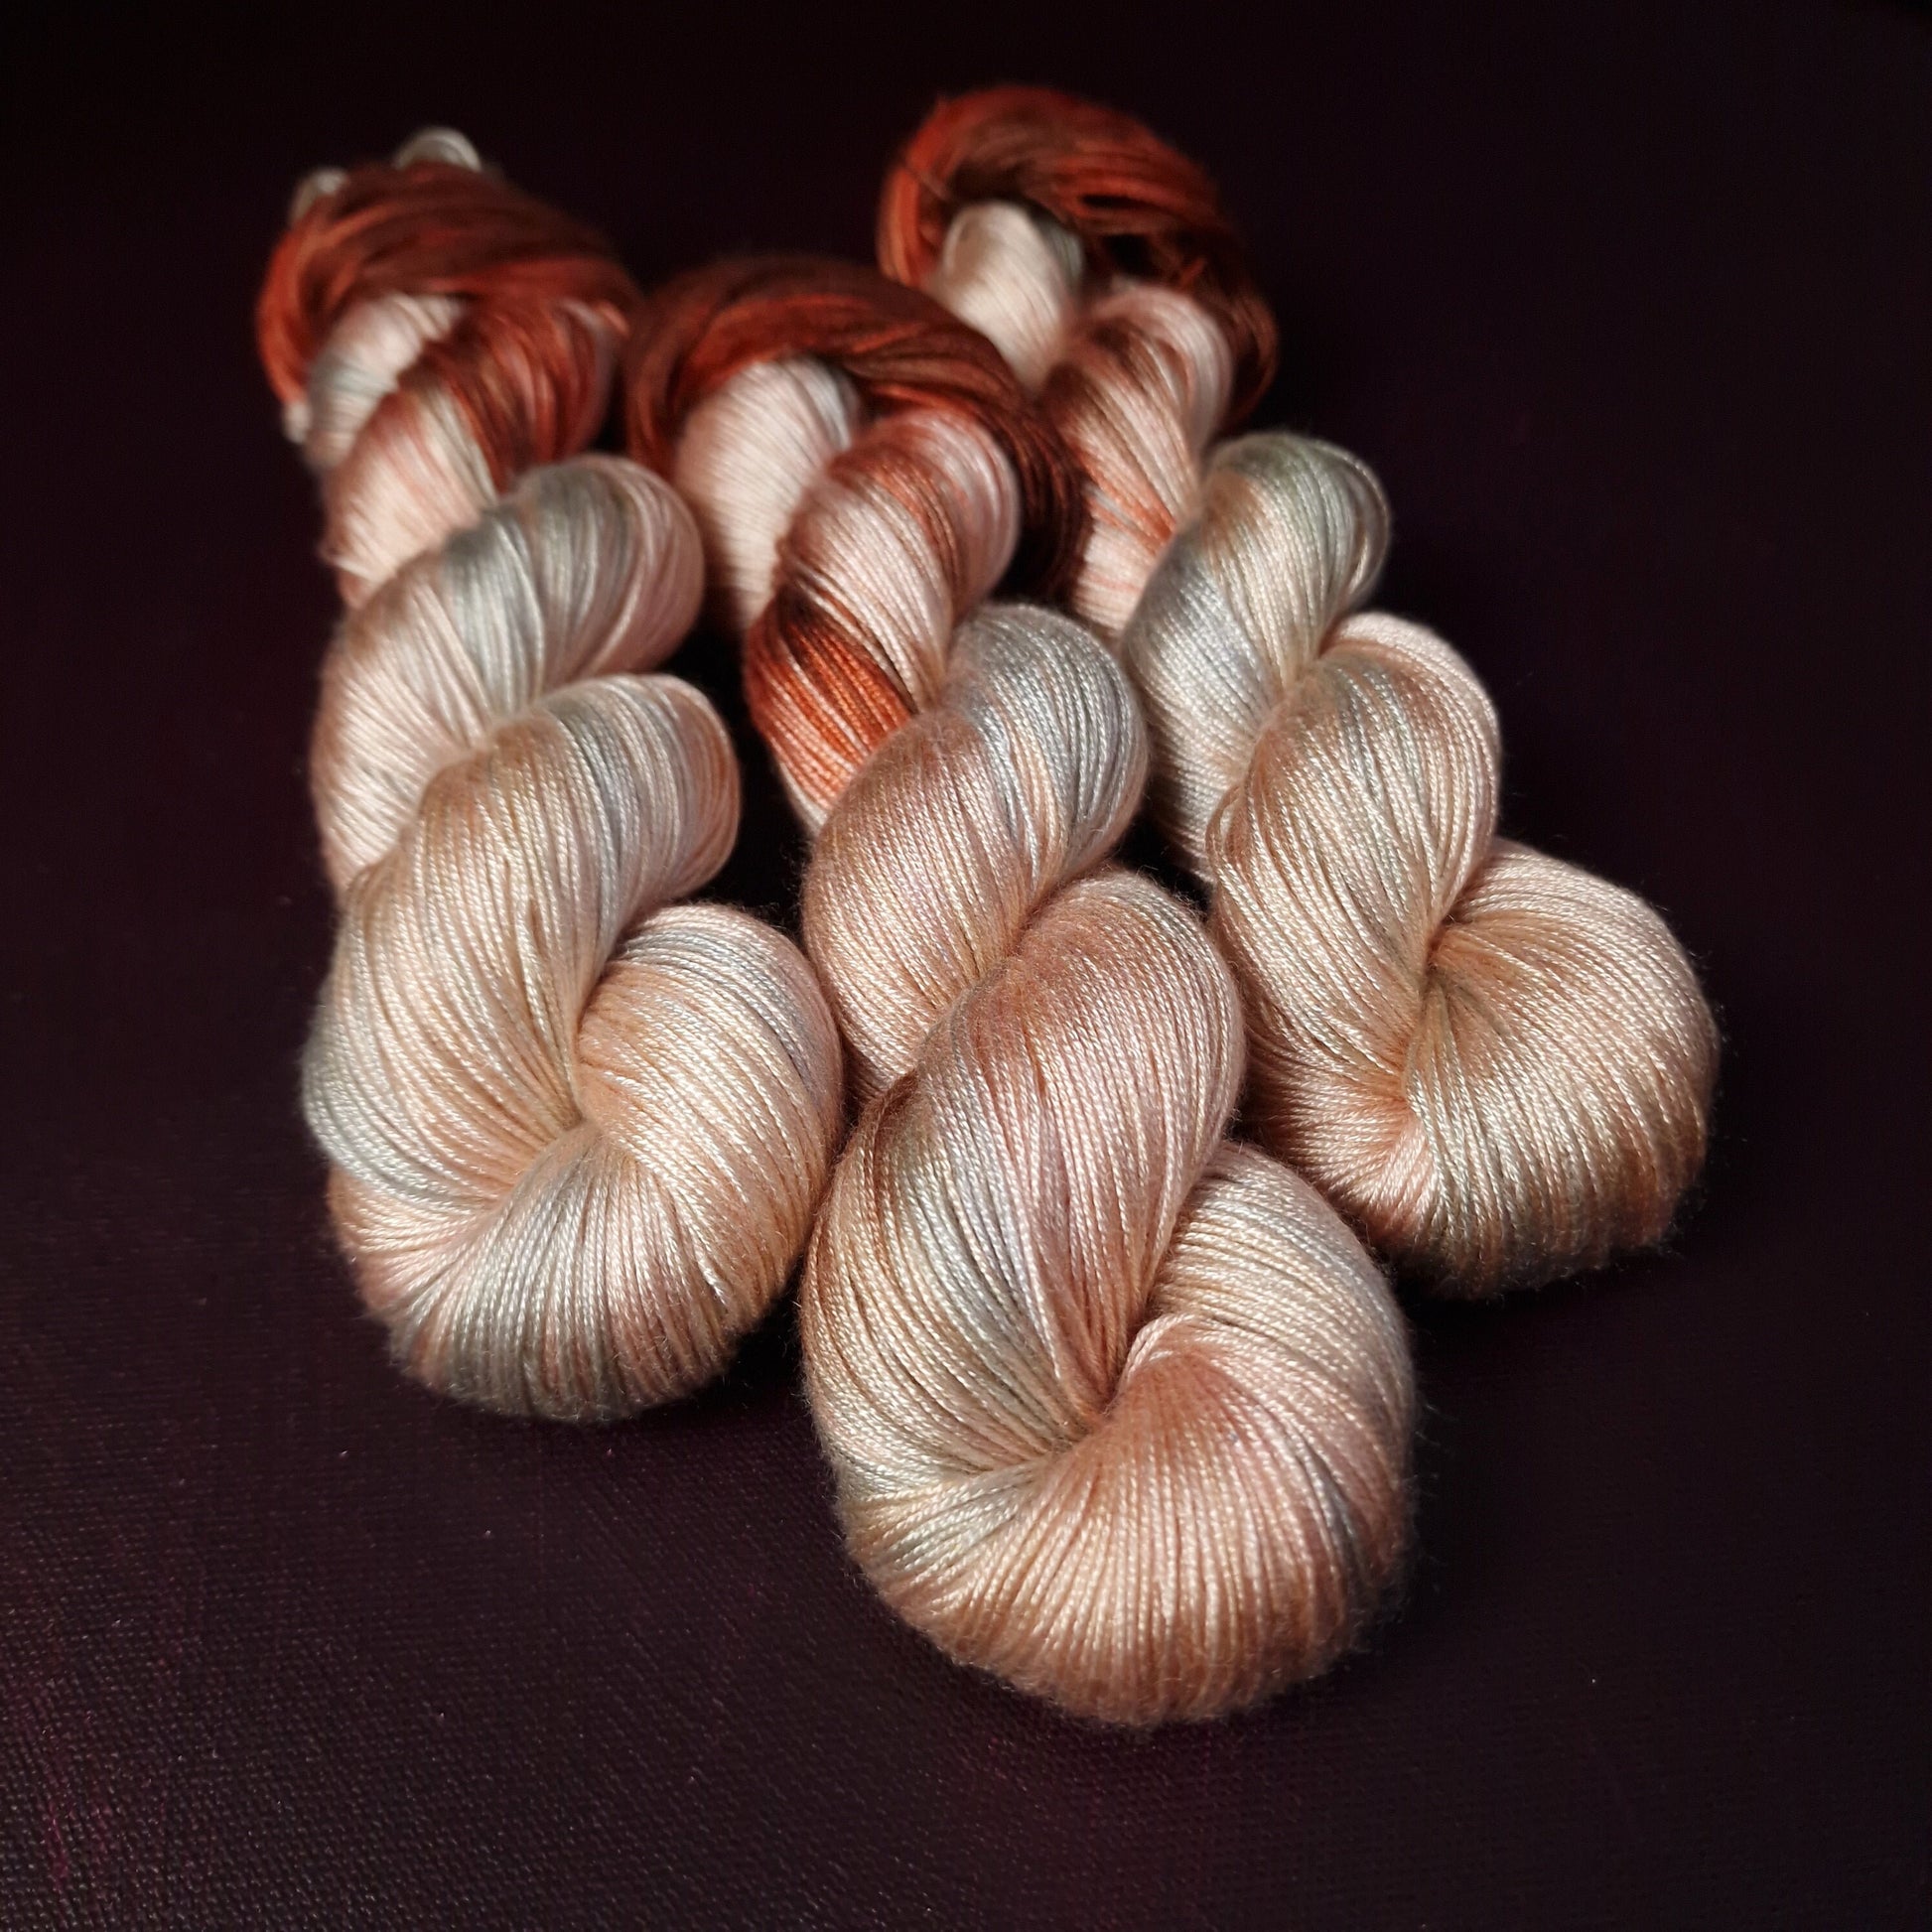 Hand dyed yarn ~ Peachy Sunset *** Dyed to order ~ fingering / DK weight tencel OR bamboo yarn, vegan, hand painted